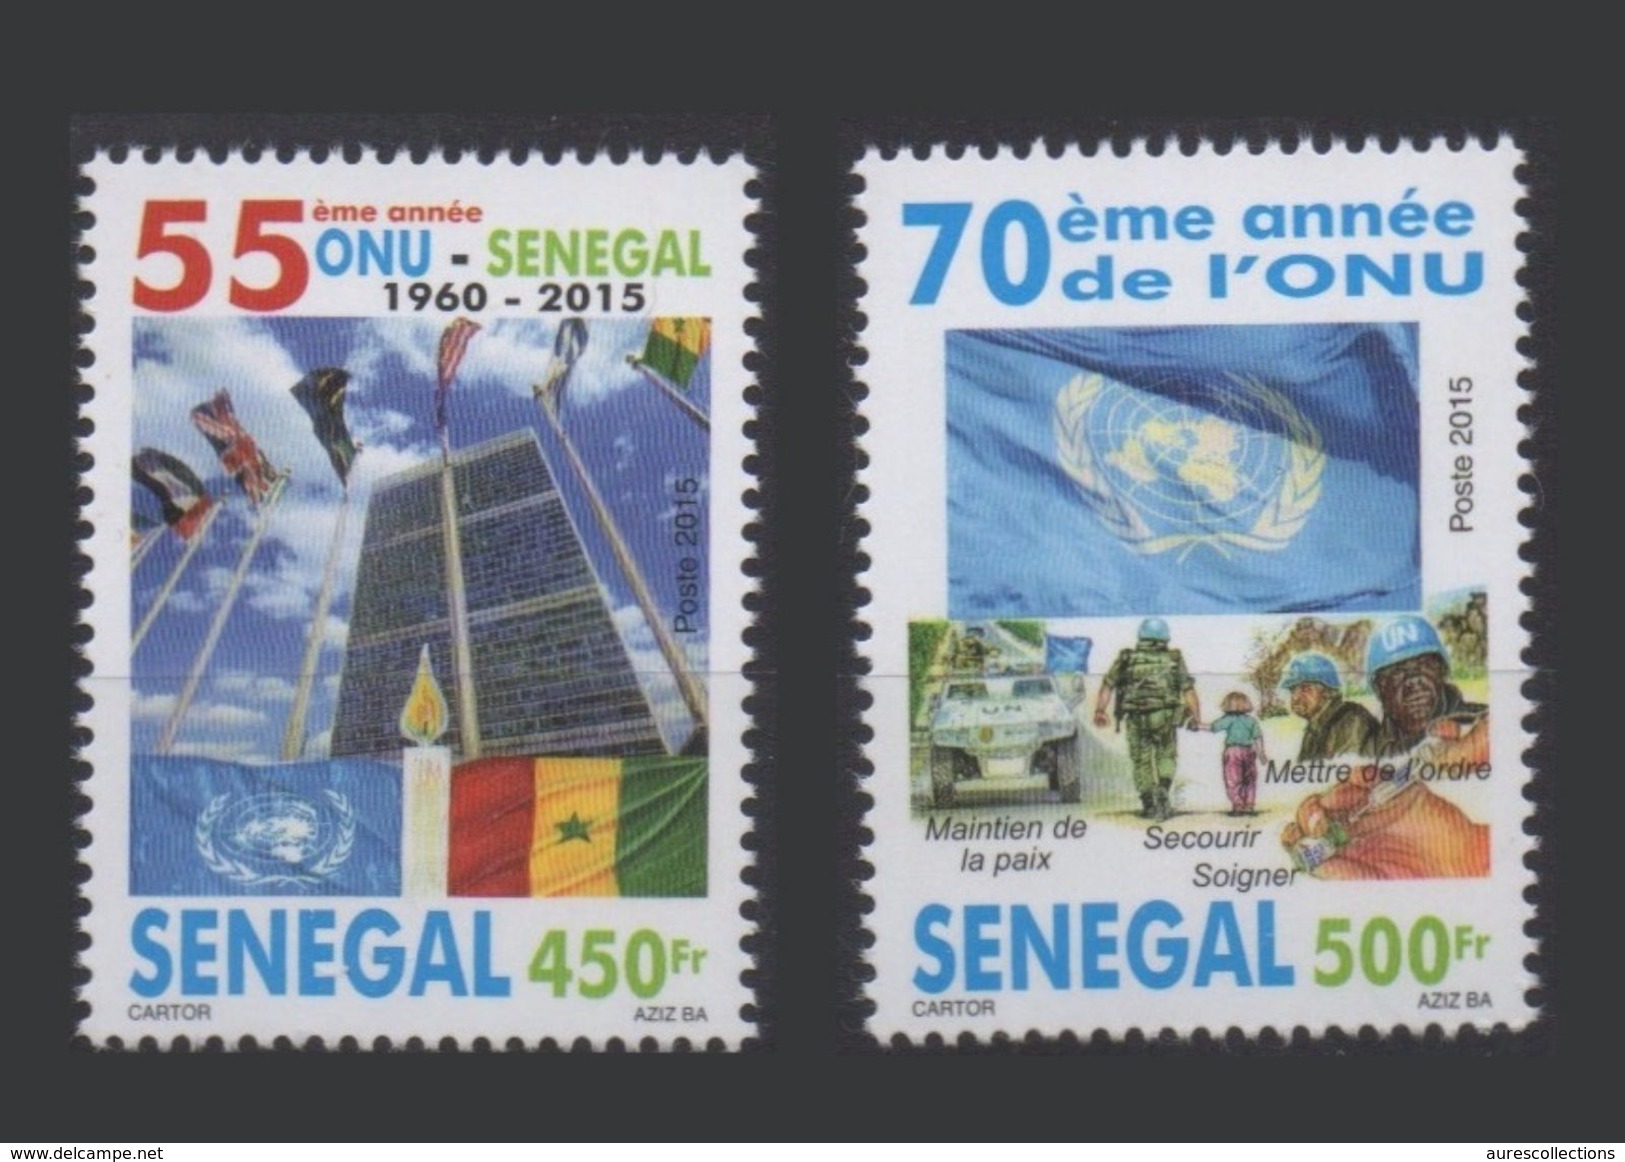 ¤NEW YEAR SALE¤ SENEGAL 2015 70 TH ANNIVERSARY UN UNITED NATIONS UNIES ONU ORGANISATIONS ORGANIZATIONS JOINT ISSUE MNH - Emissions Communes